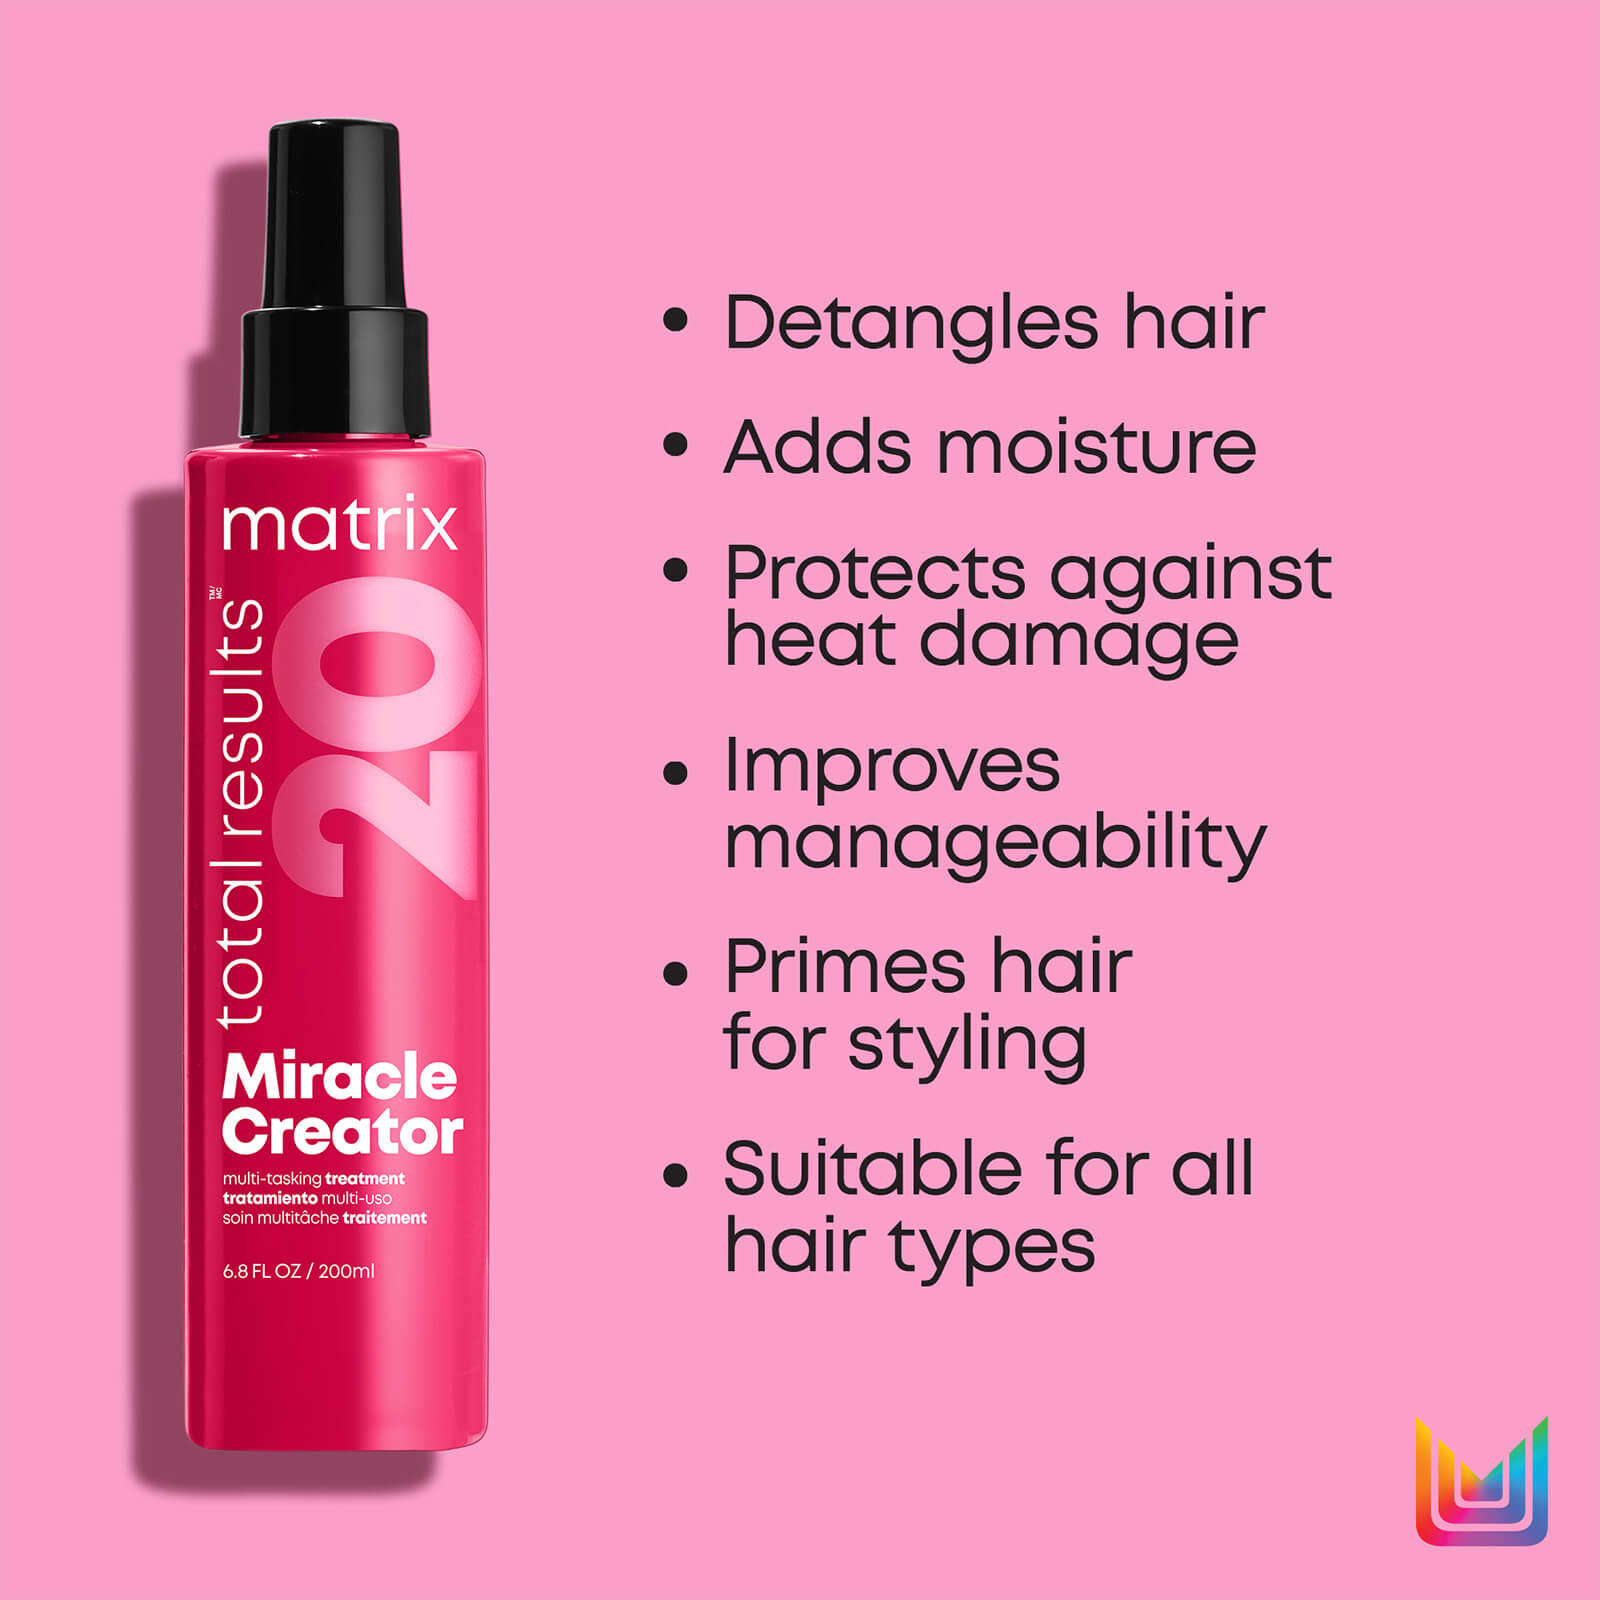 Detangles hair, adds moisture, and protects against heat damage, improves manageability, primes hair for styling, suitable for all hair types